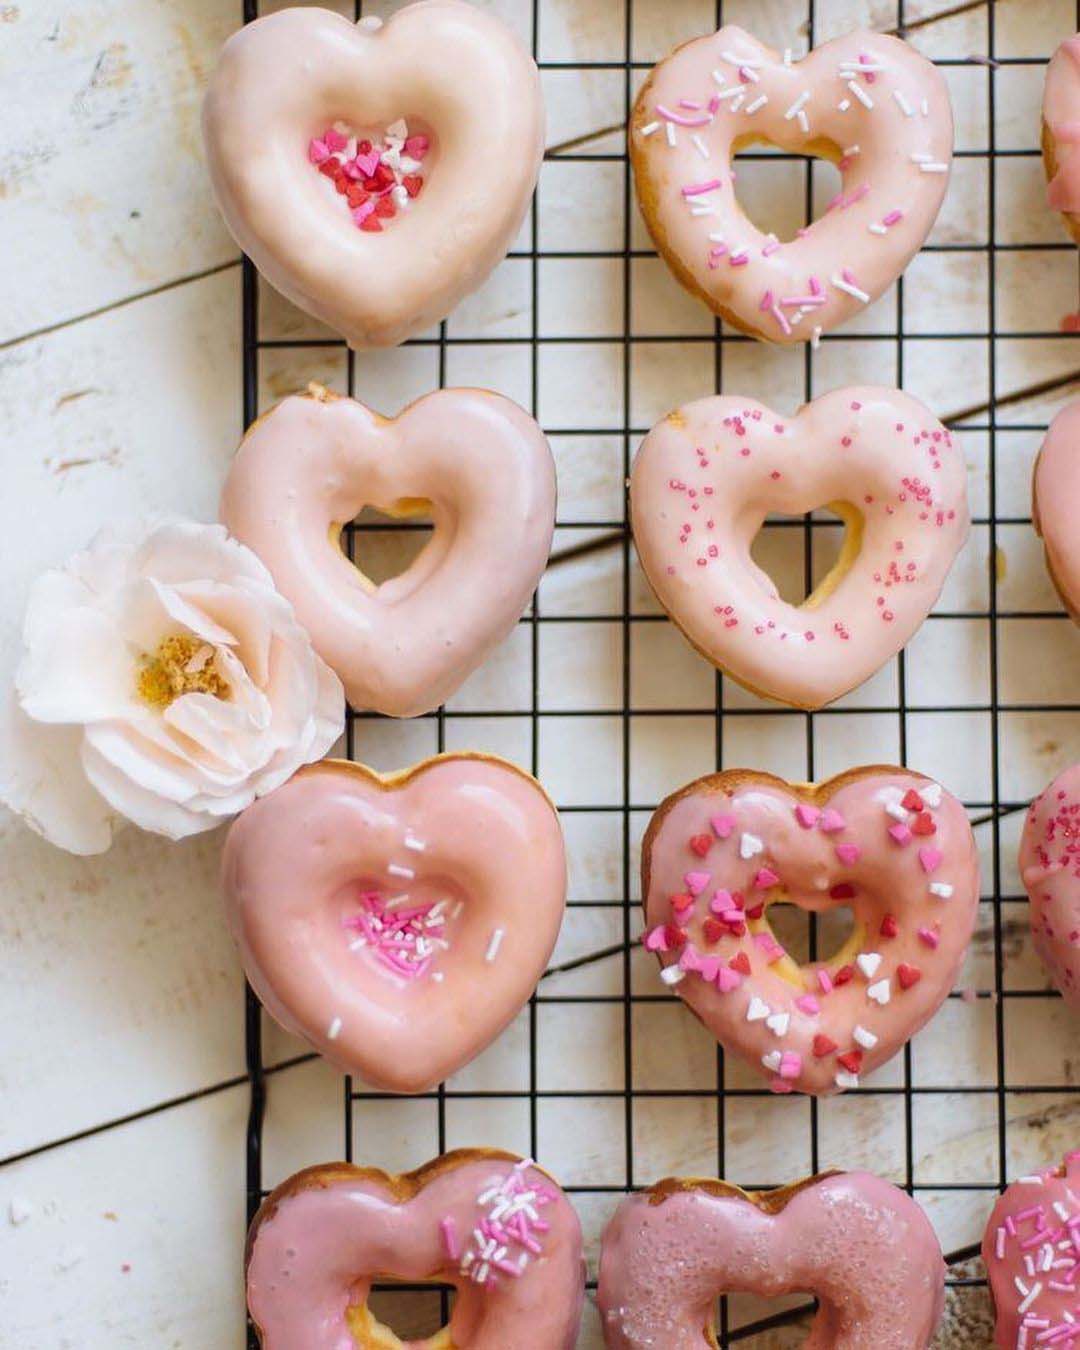 engagement party cakes pink donuts in heart shape donutsclub_kh